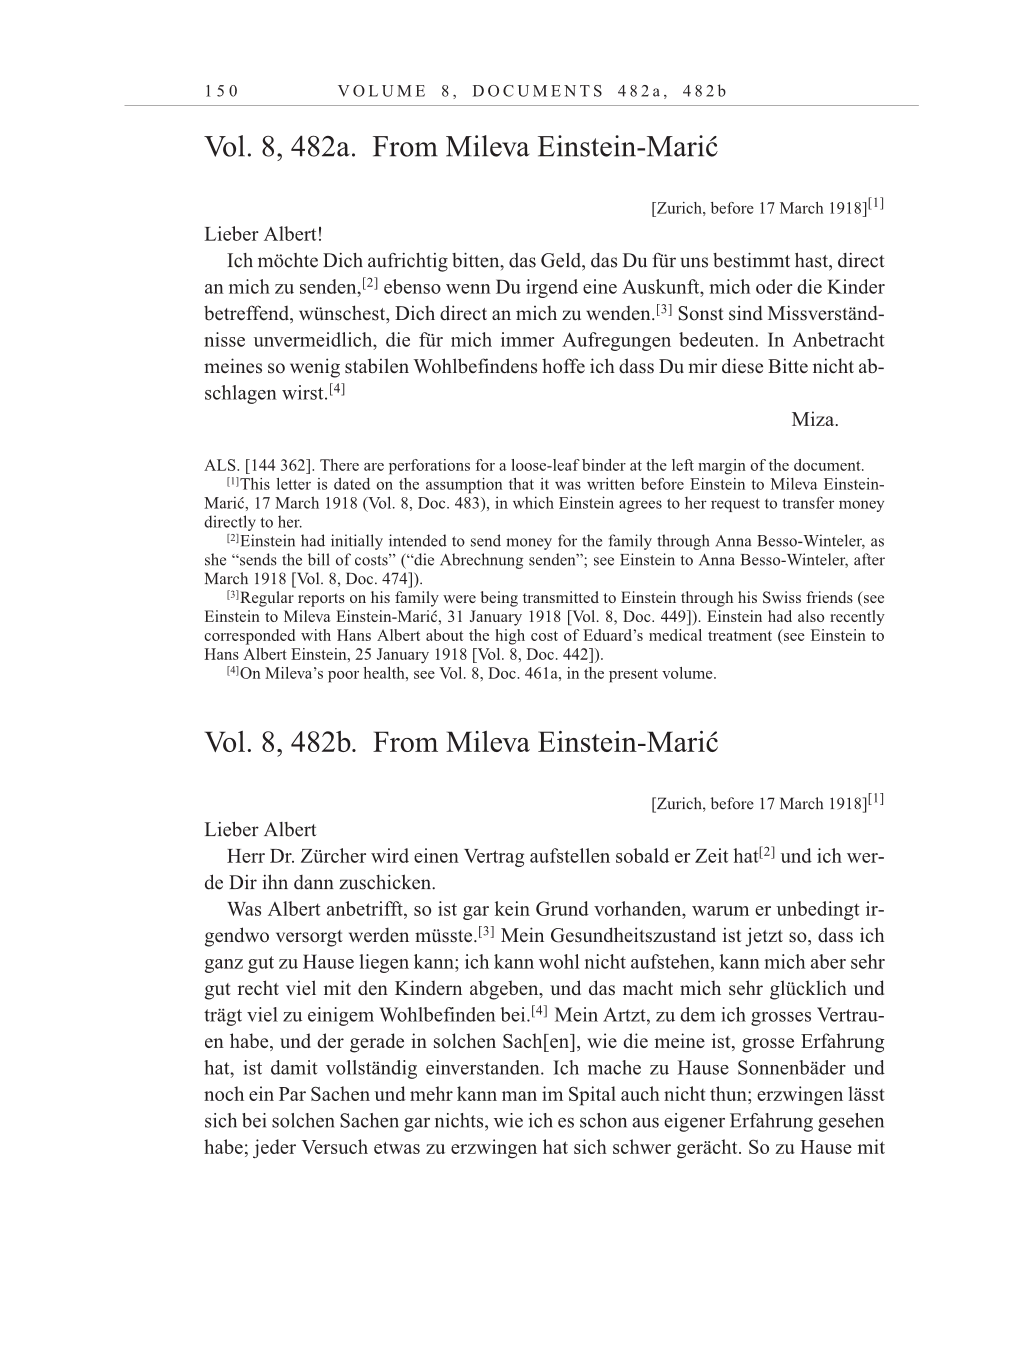 Volume 10: The Berlin Years: Correspondence May-December 1920 / Supplementary Correspondence 1909-1920 page 150